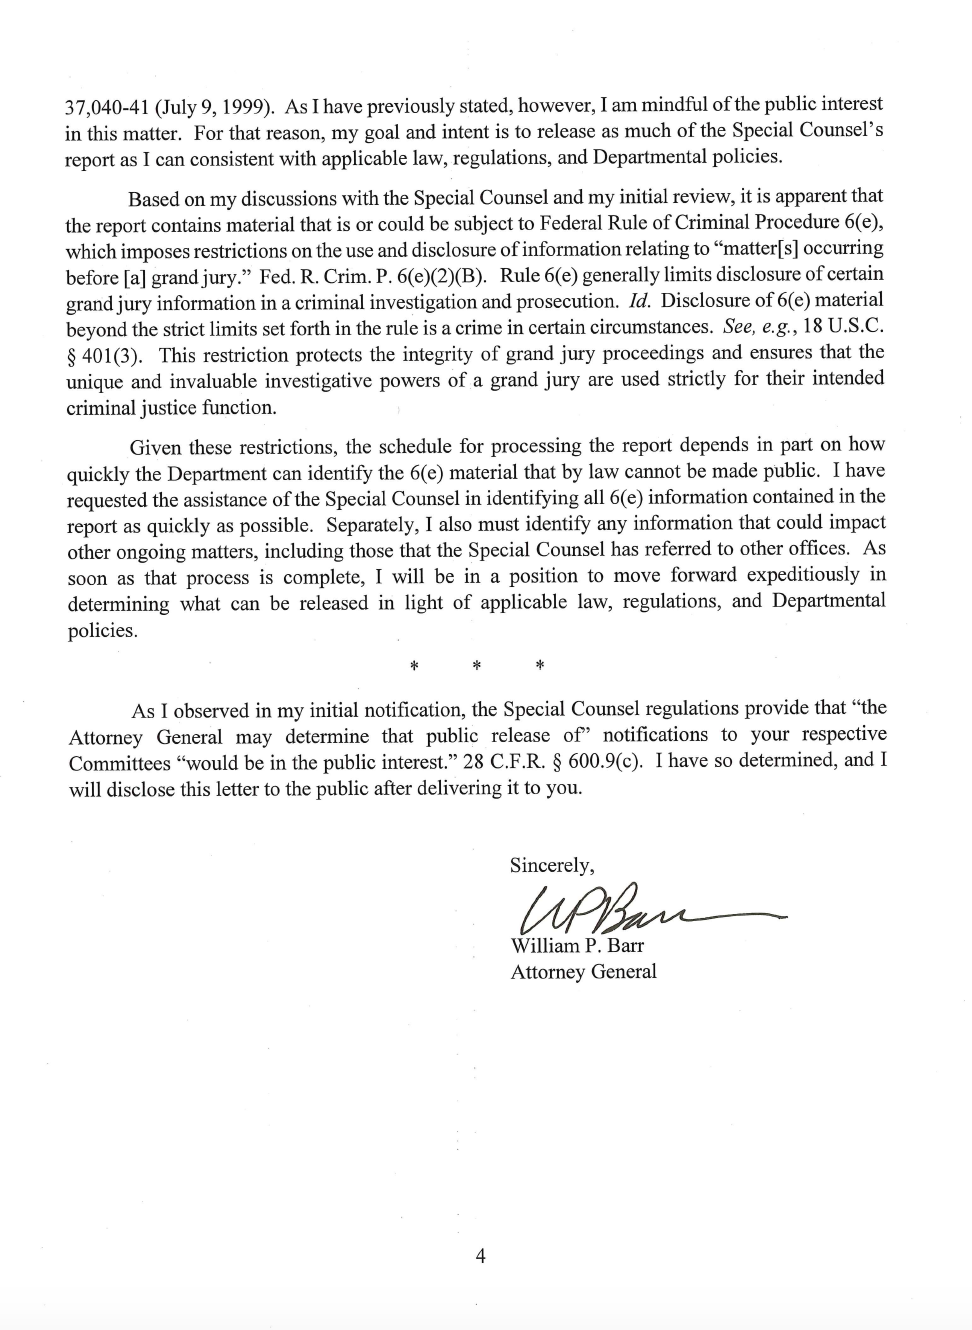 Page 4 of Attorney General William Barr's letter to Congress on Special Counsel Robert Mueller's report. (Department of Justice)